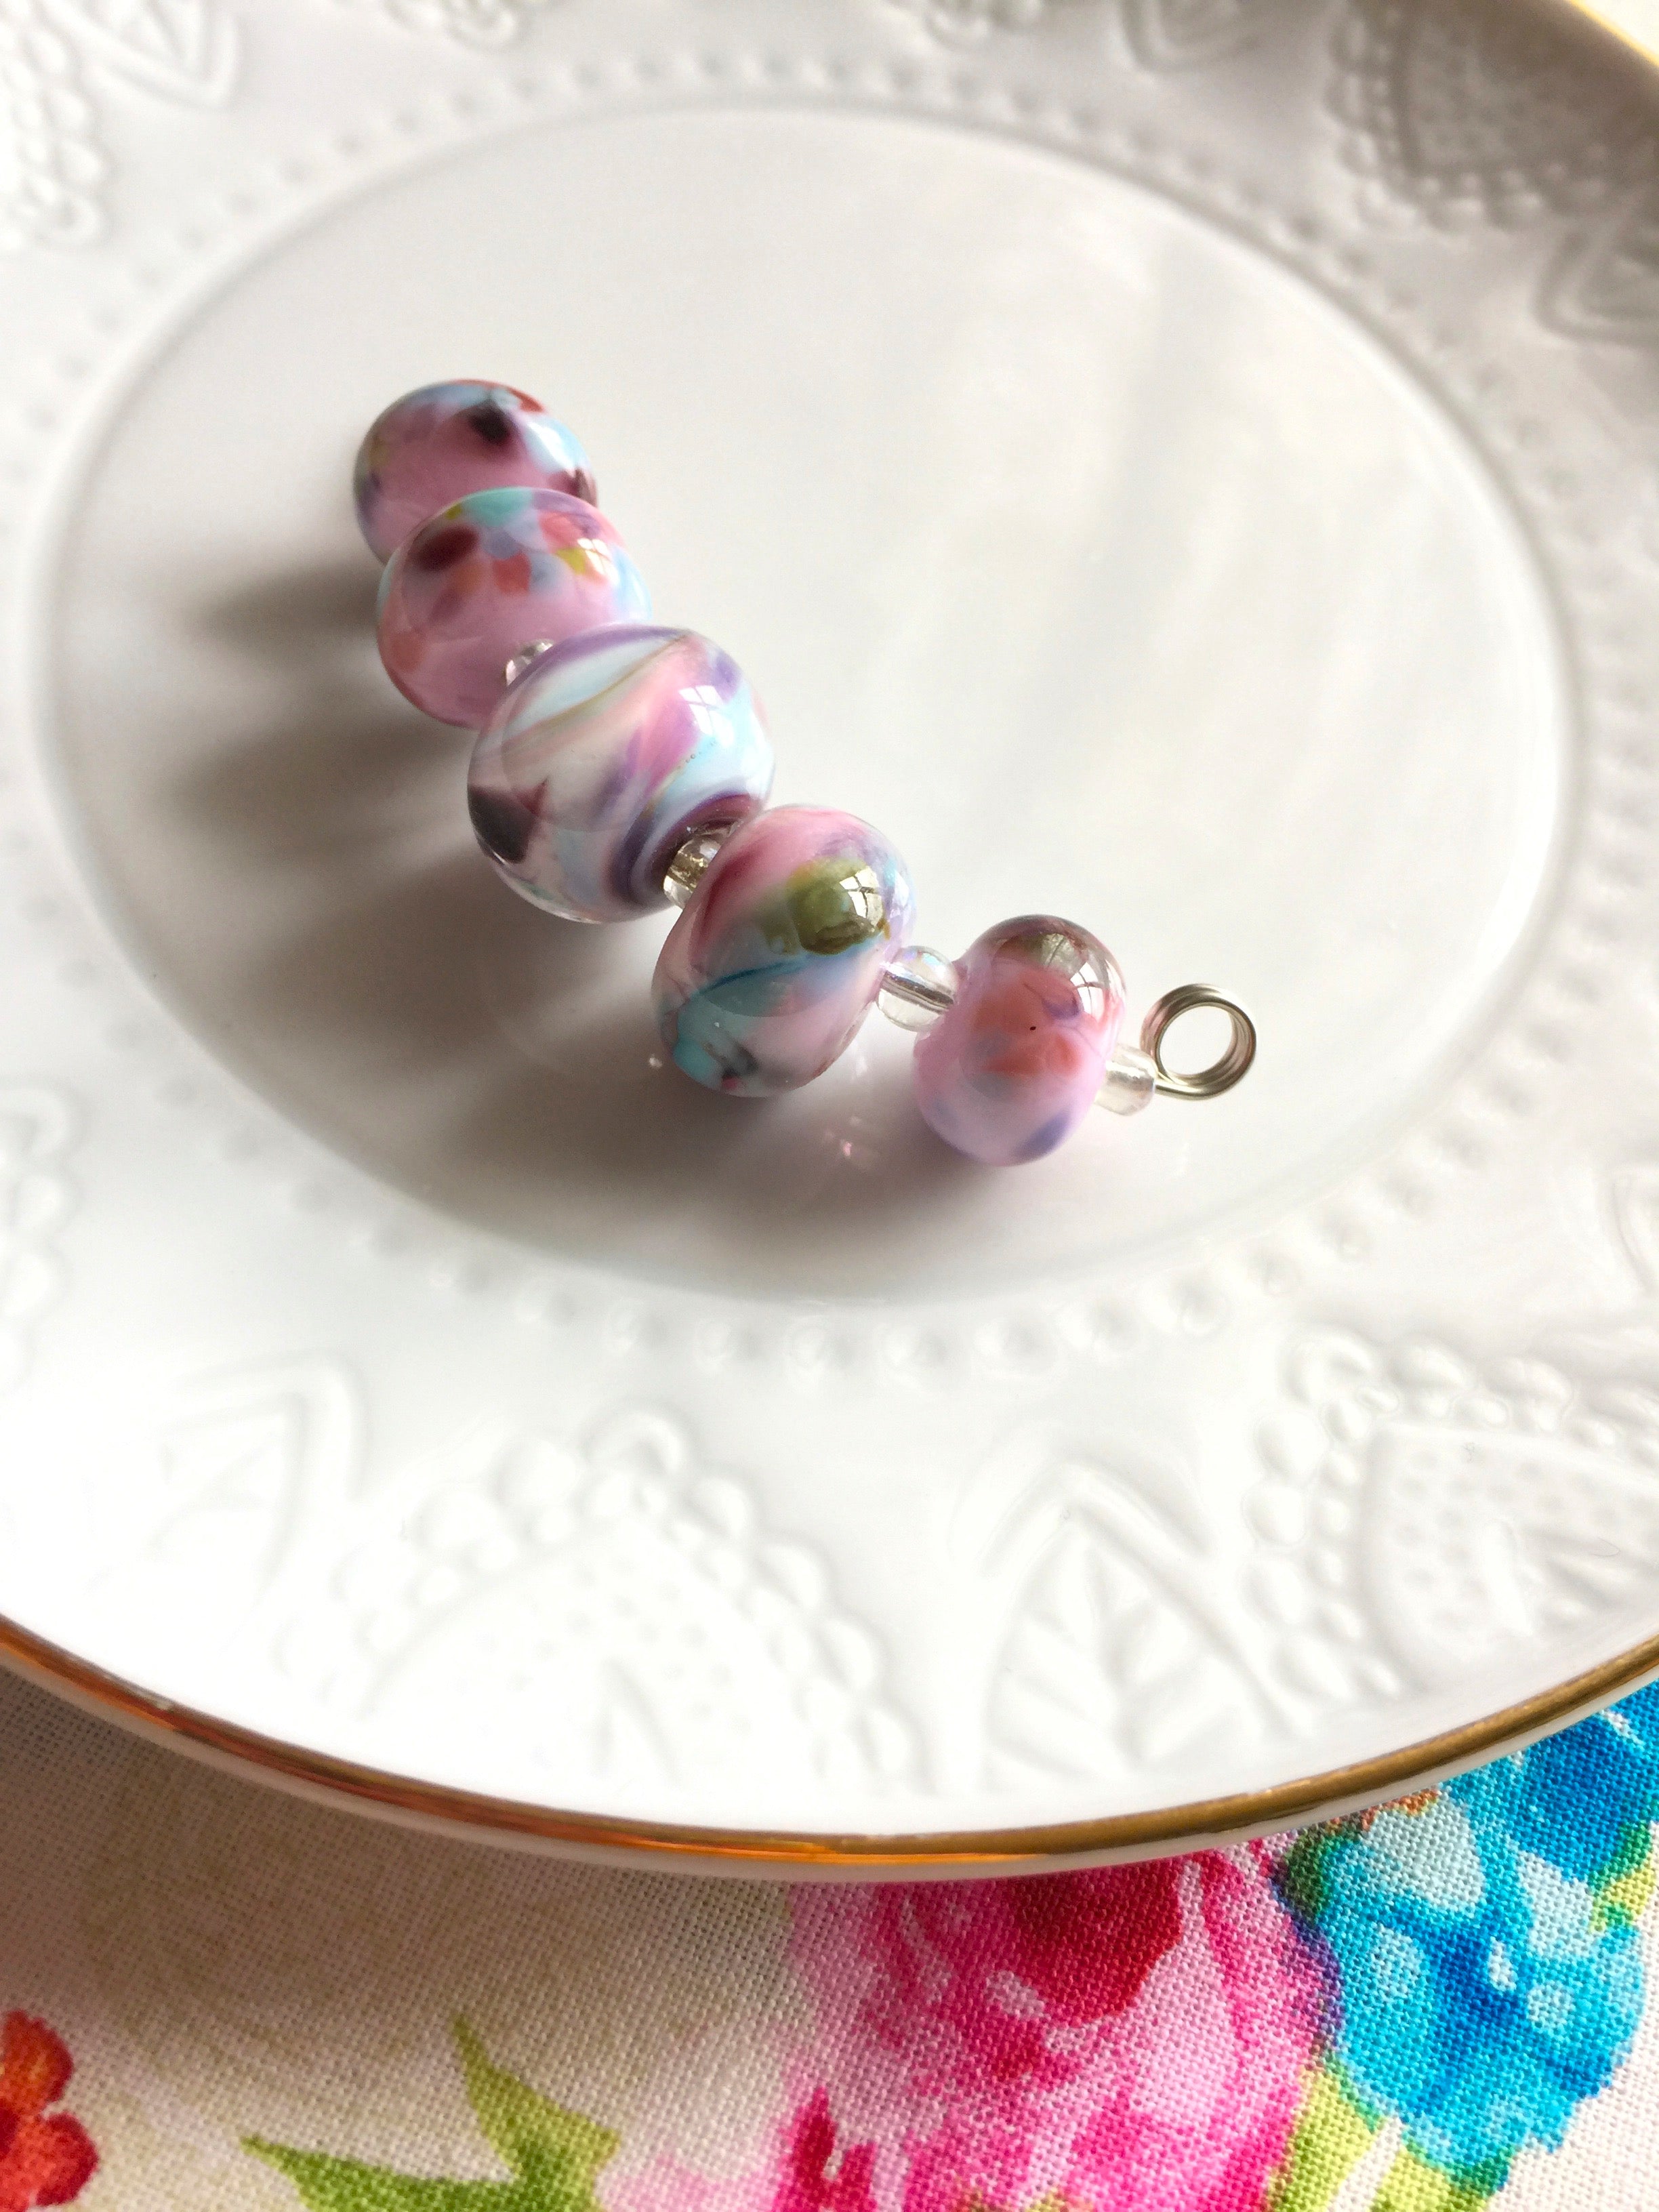 Set of 5 Handcrafted Lampwork Glass Beads in shades of Pink, Blues, Violet with spots and swirls. Perfect for crafting and jewelry making.